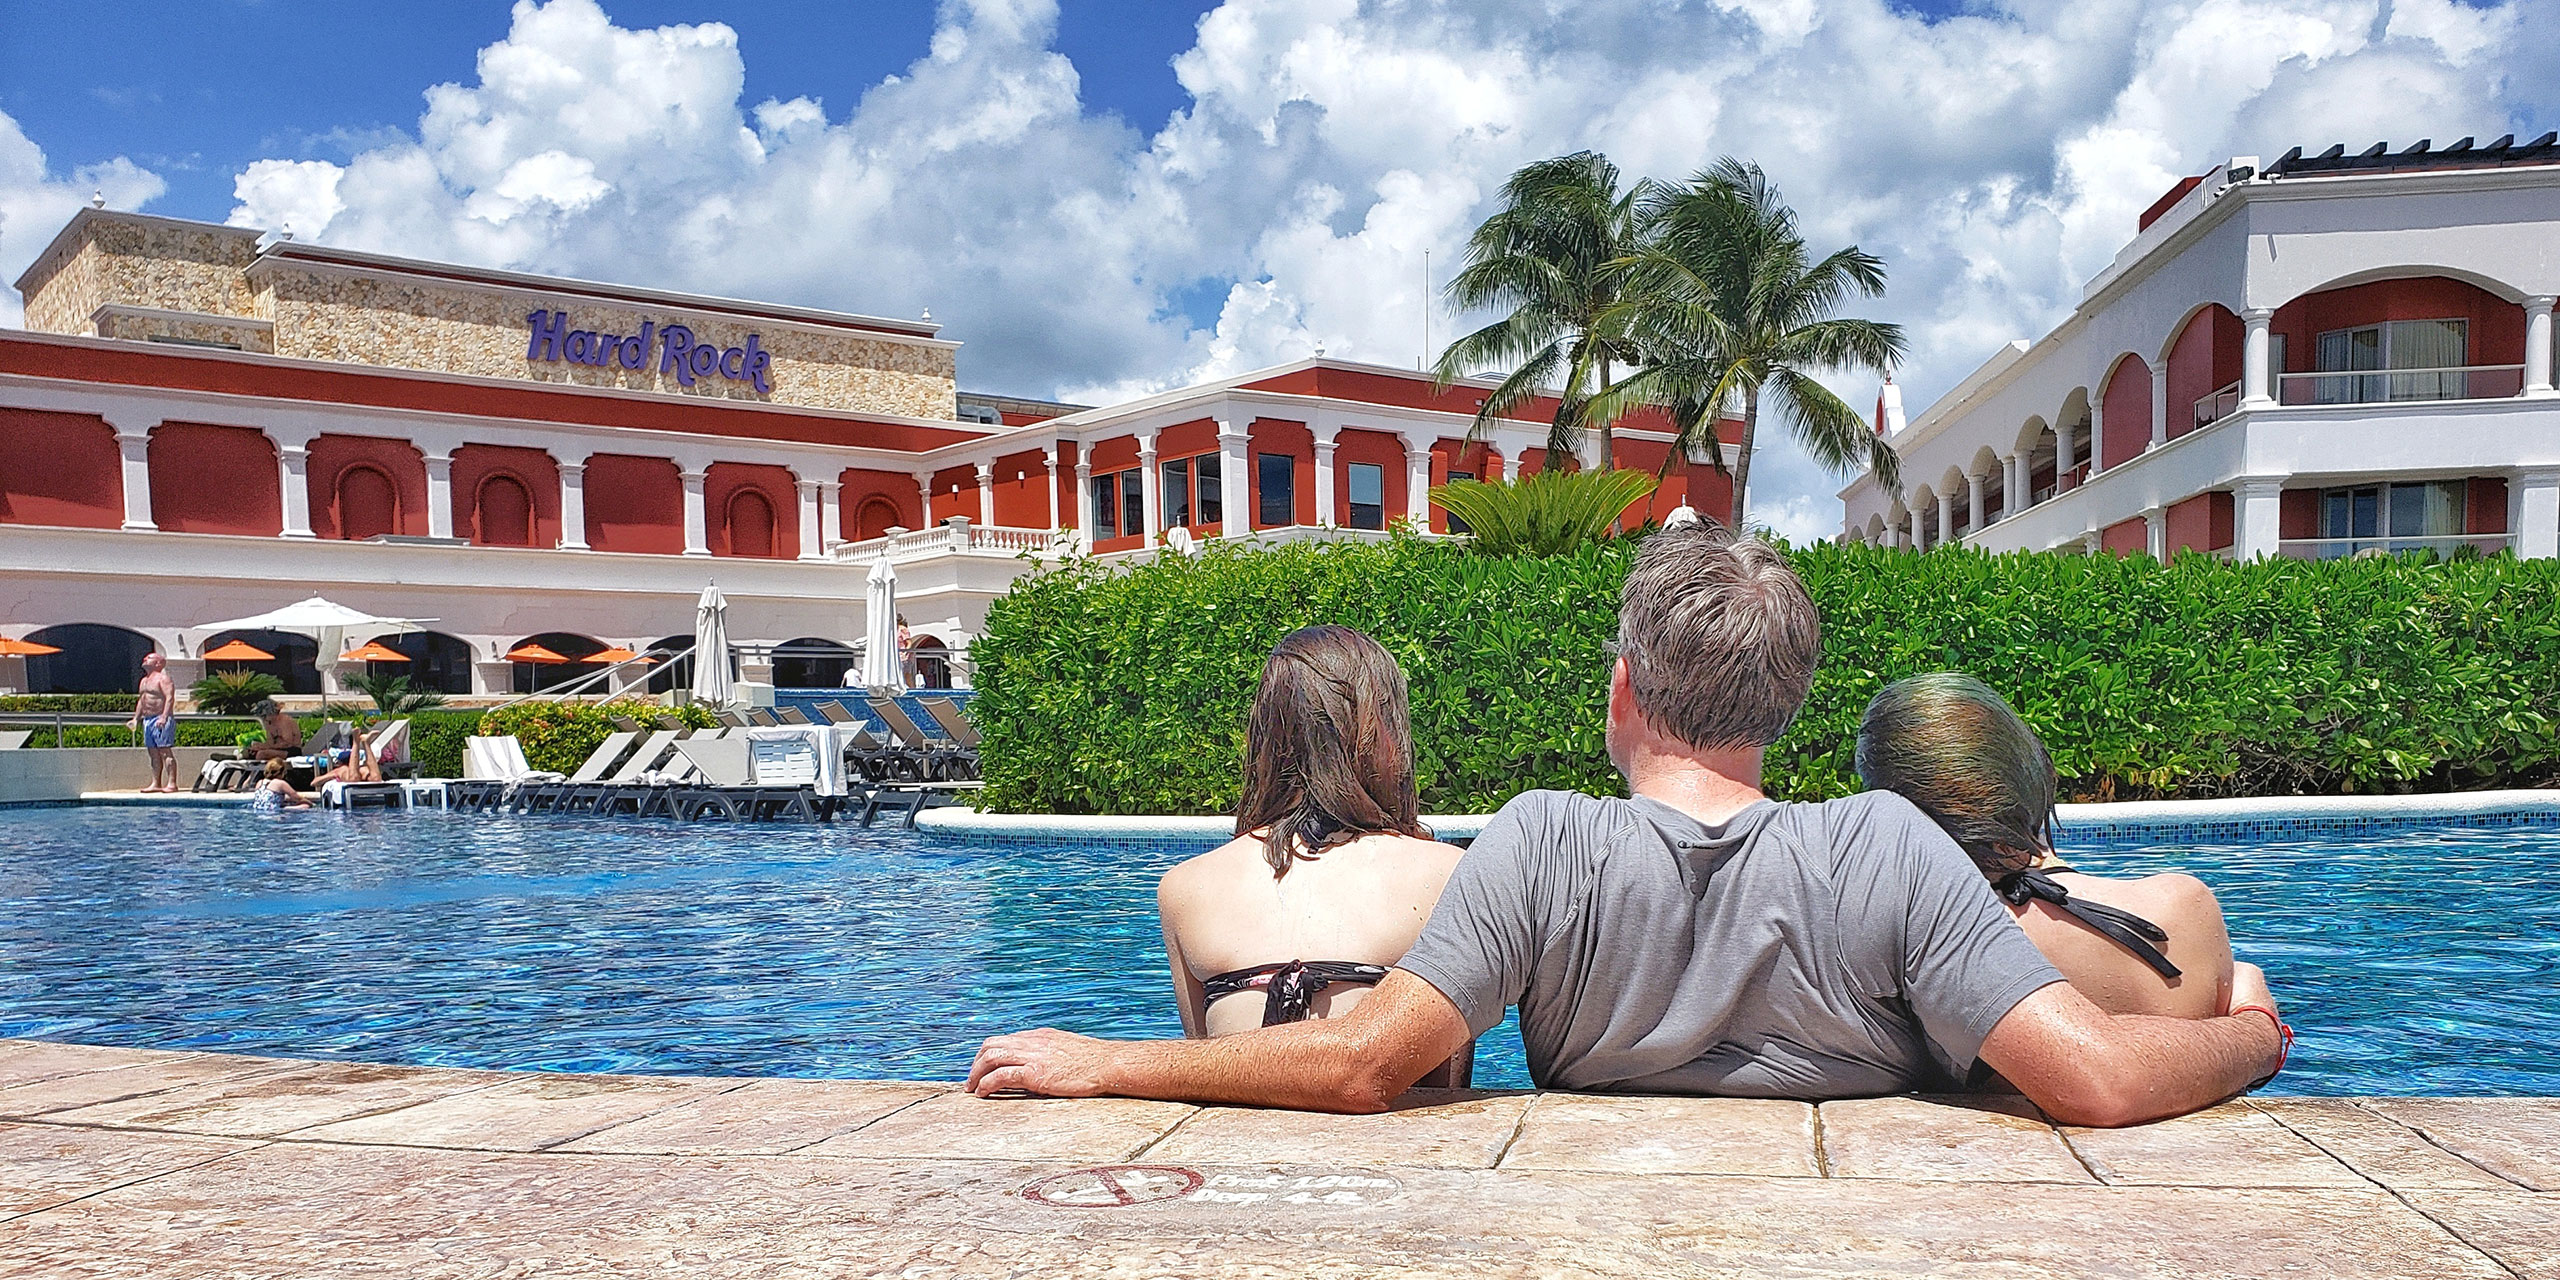 Cheap AllInclusive Resorts The Best Family Vacations for 